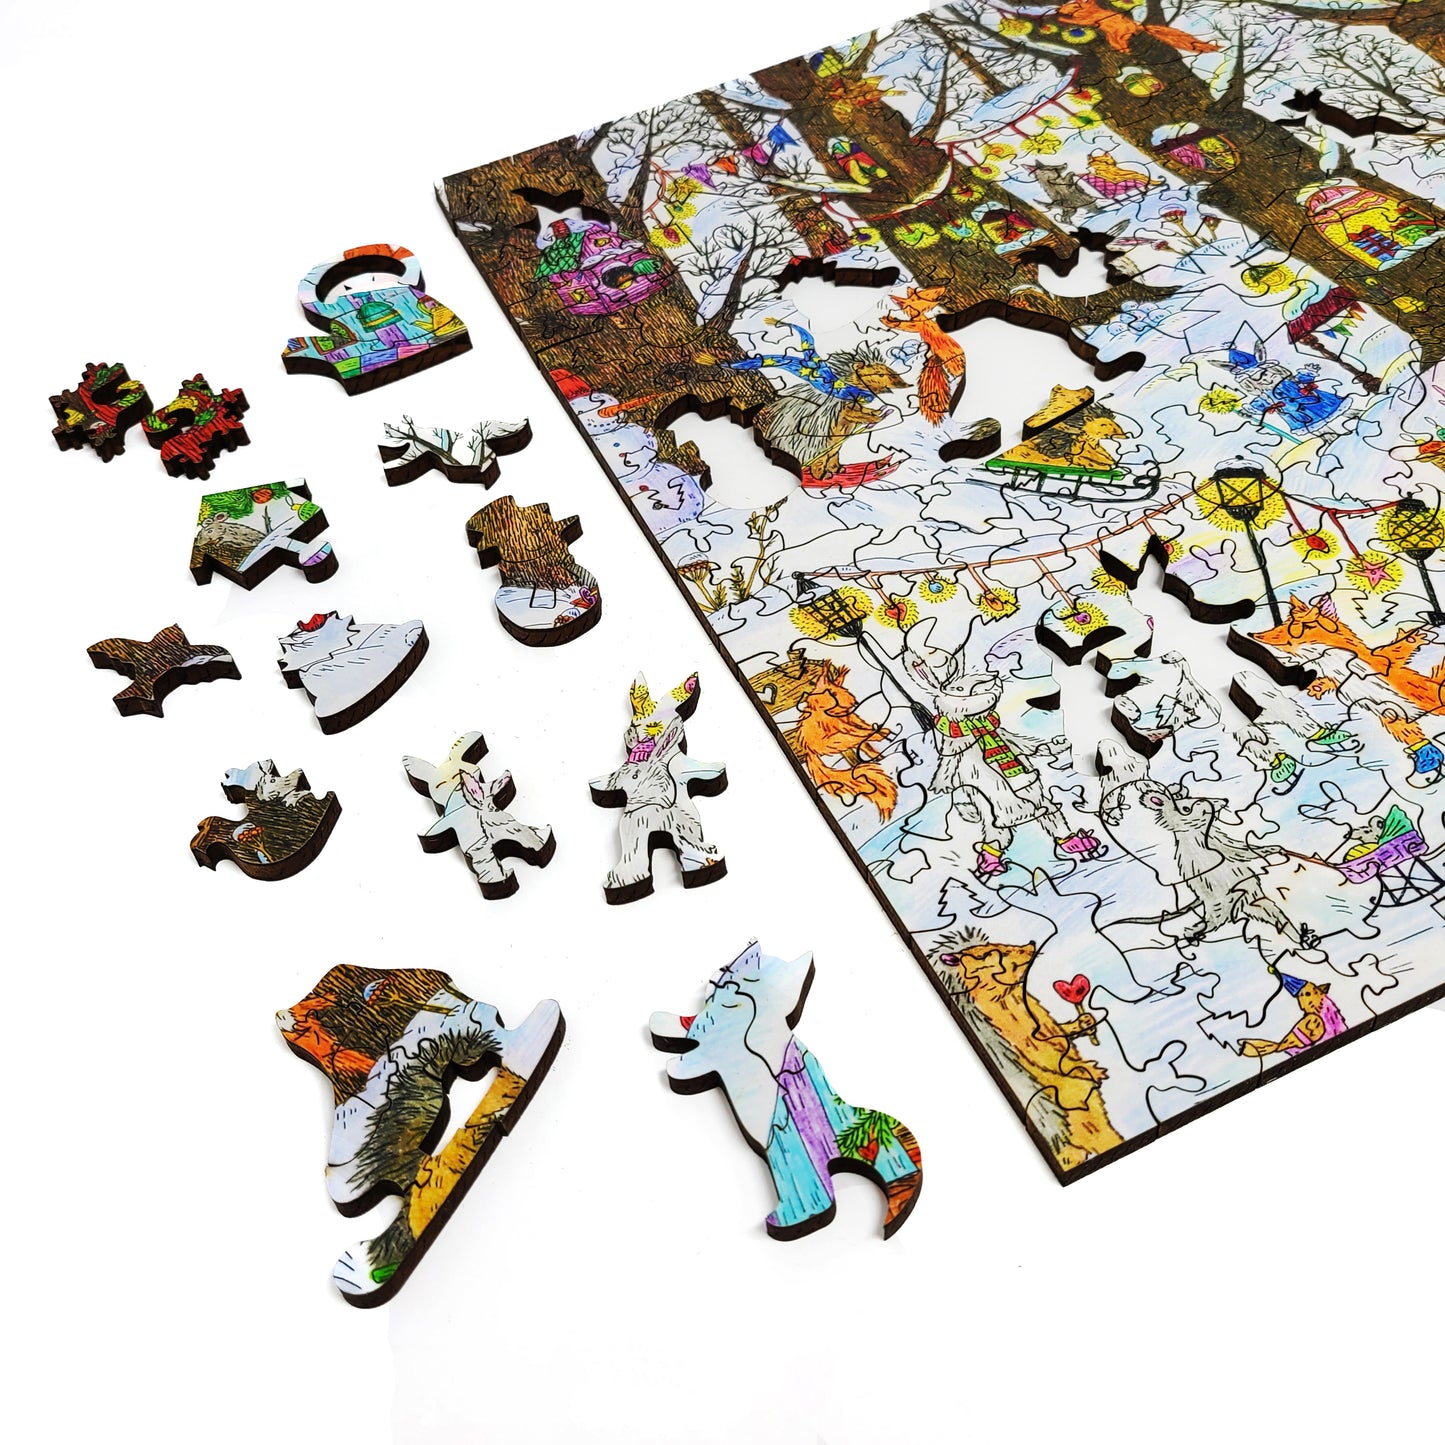 Wooden Jigsaw Puzzle with Uniquely Shaped Pieces for Adults - 434 Pieces - Fairy Forest. Winter